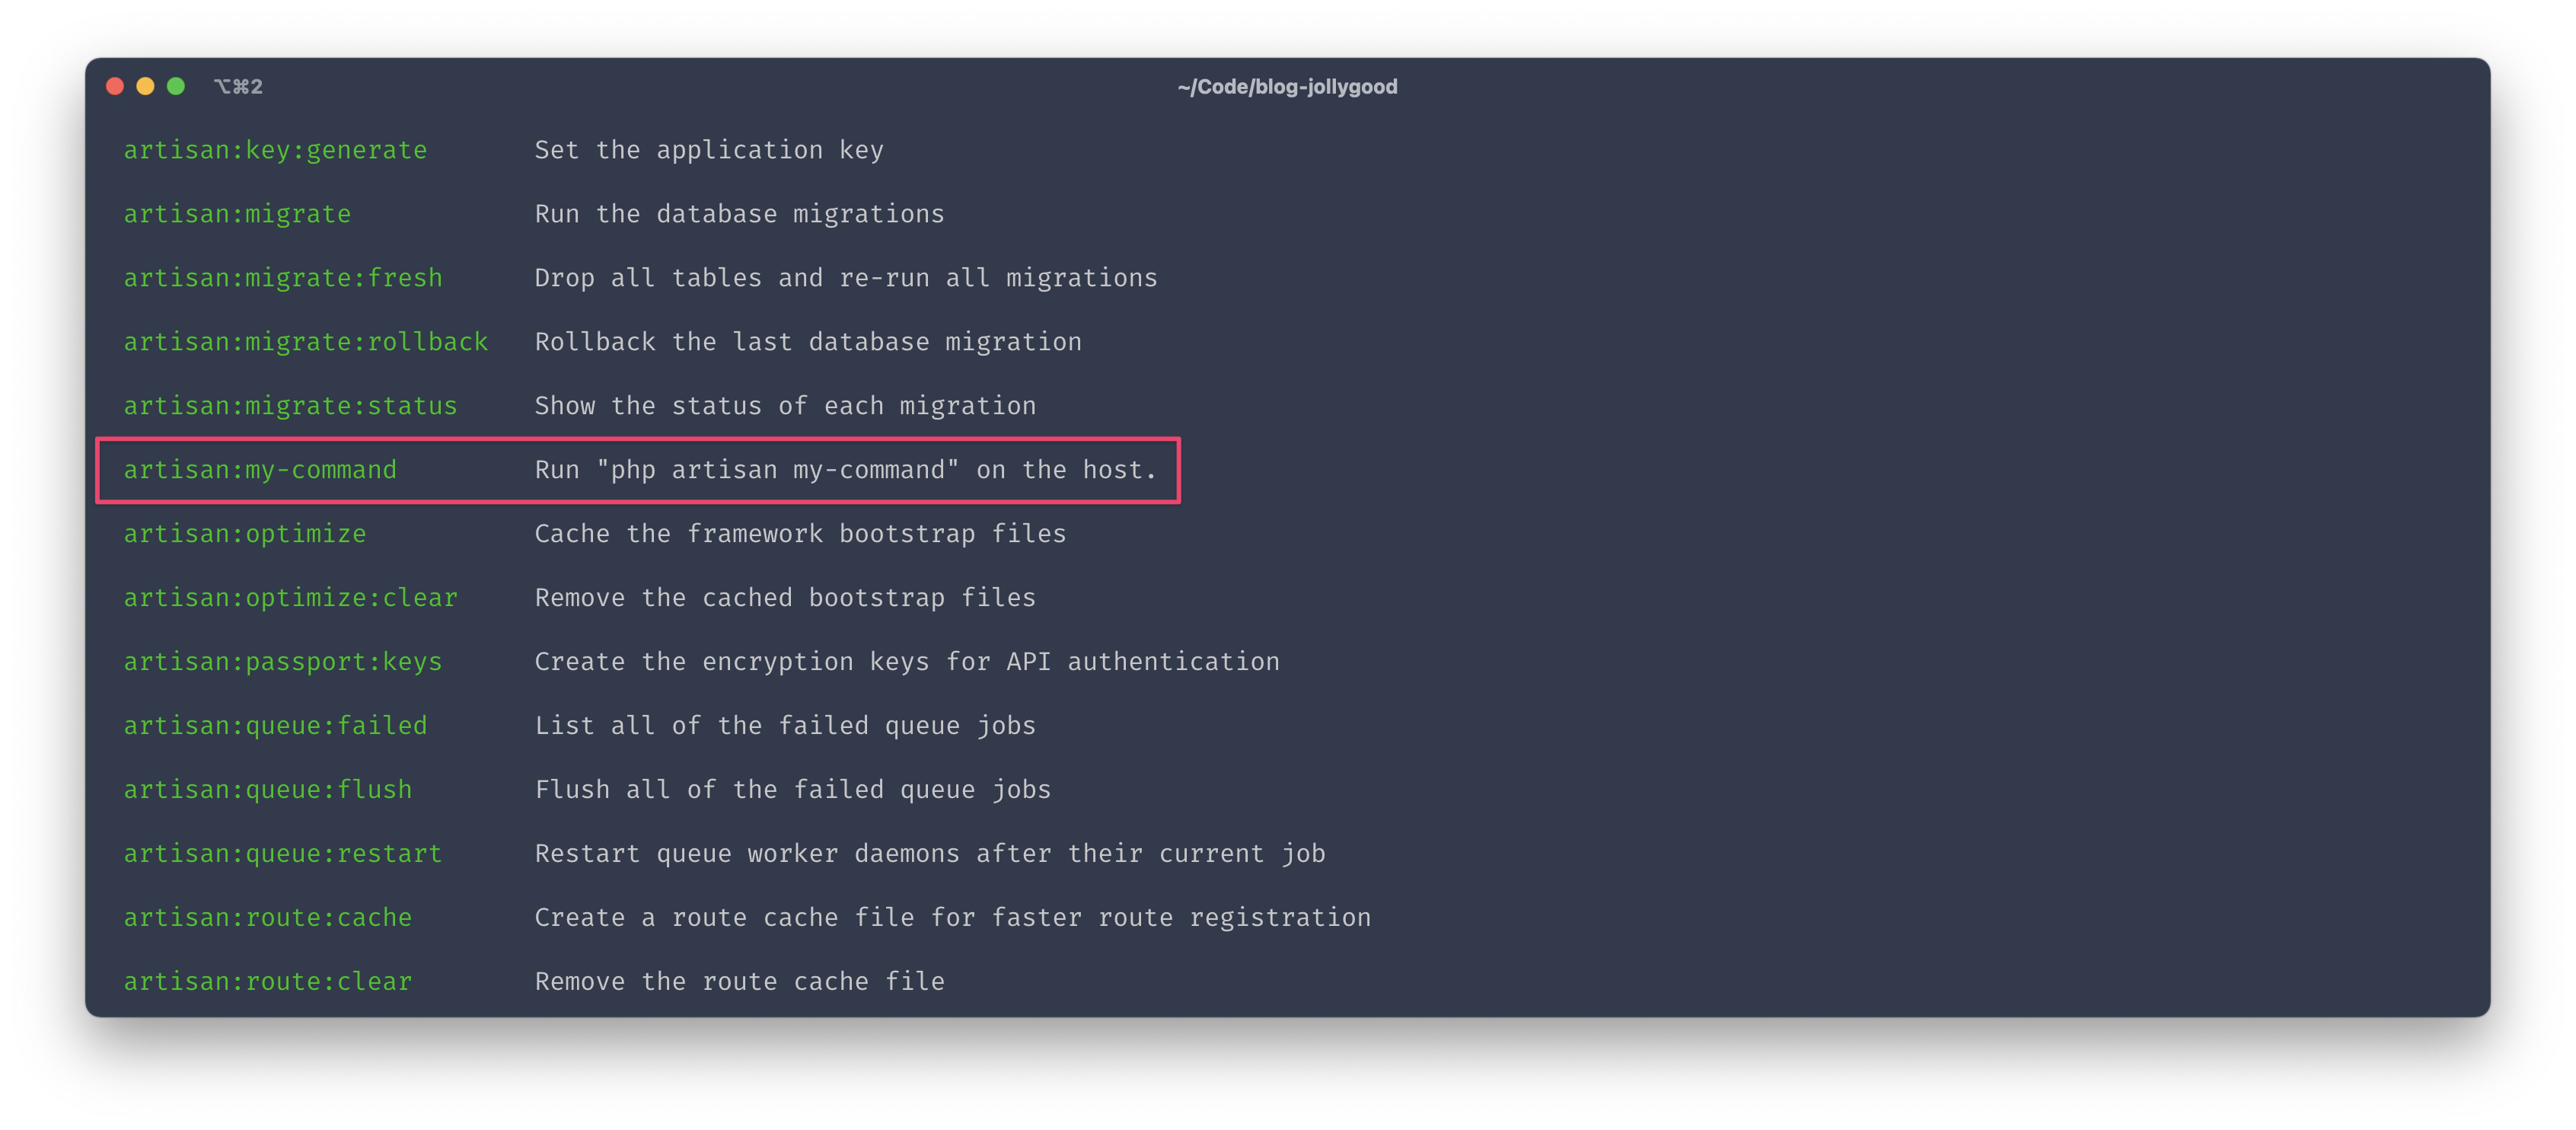 Screenshot of the terminal output of &quot;dep&quot; showing the list of all available tasks including &quot;artisan:my-command&quot;.